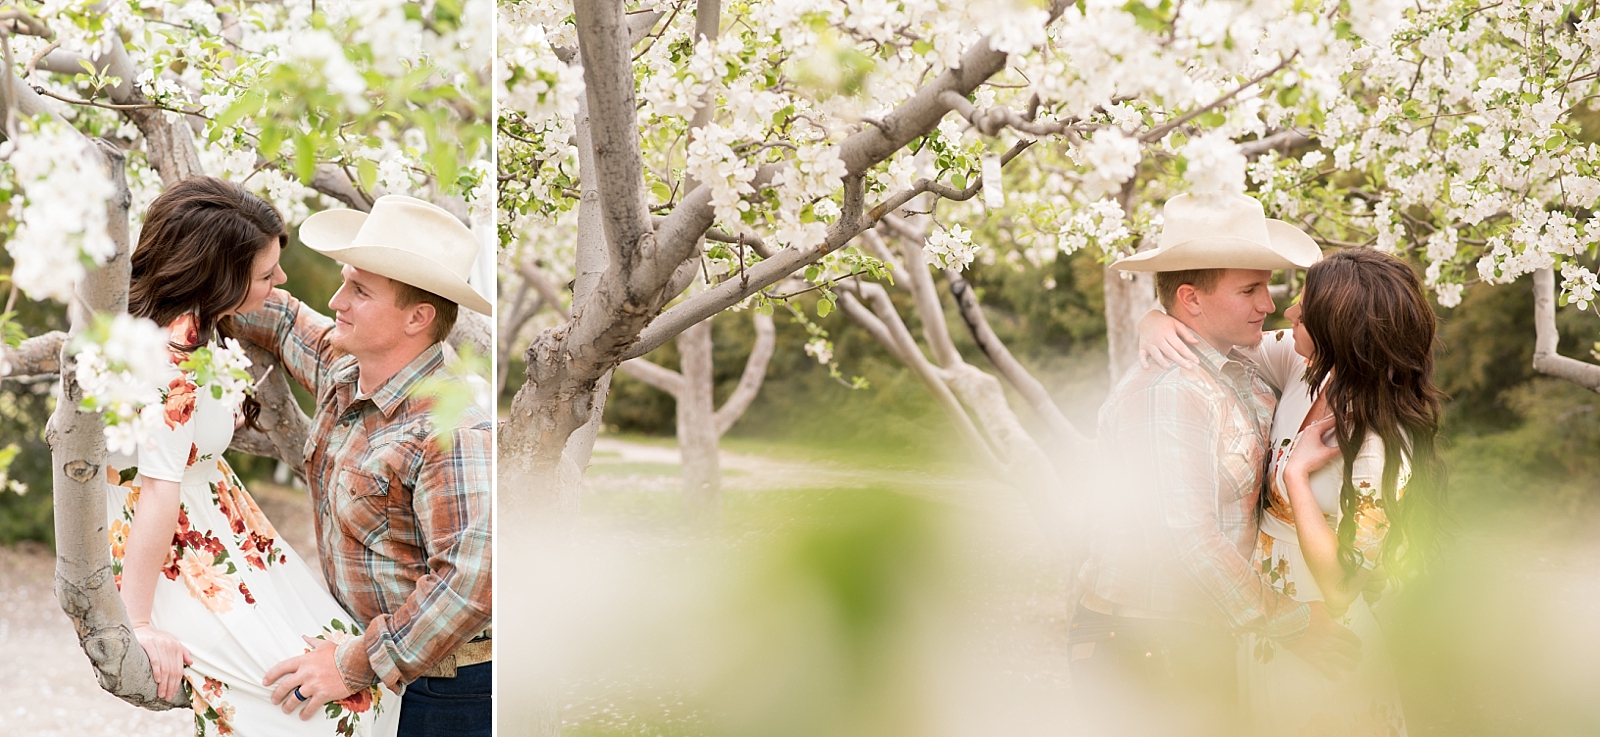 couple in the blossoms spring time engagements